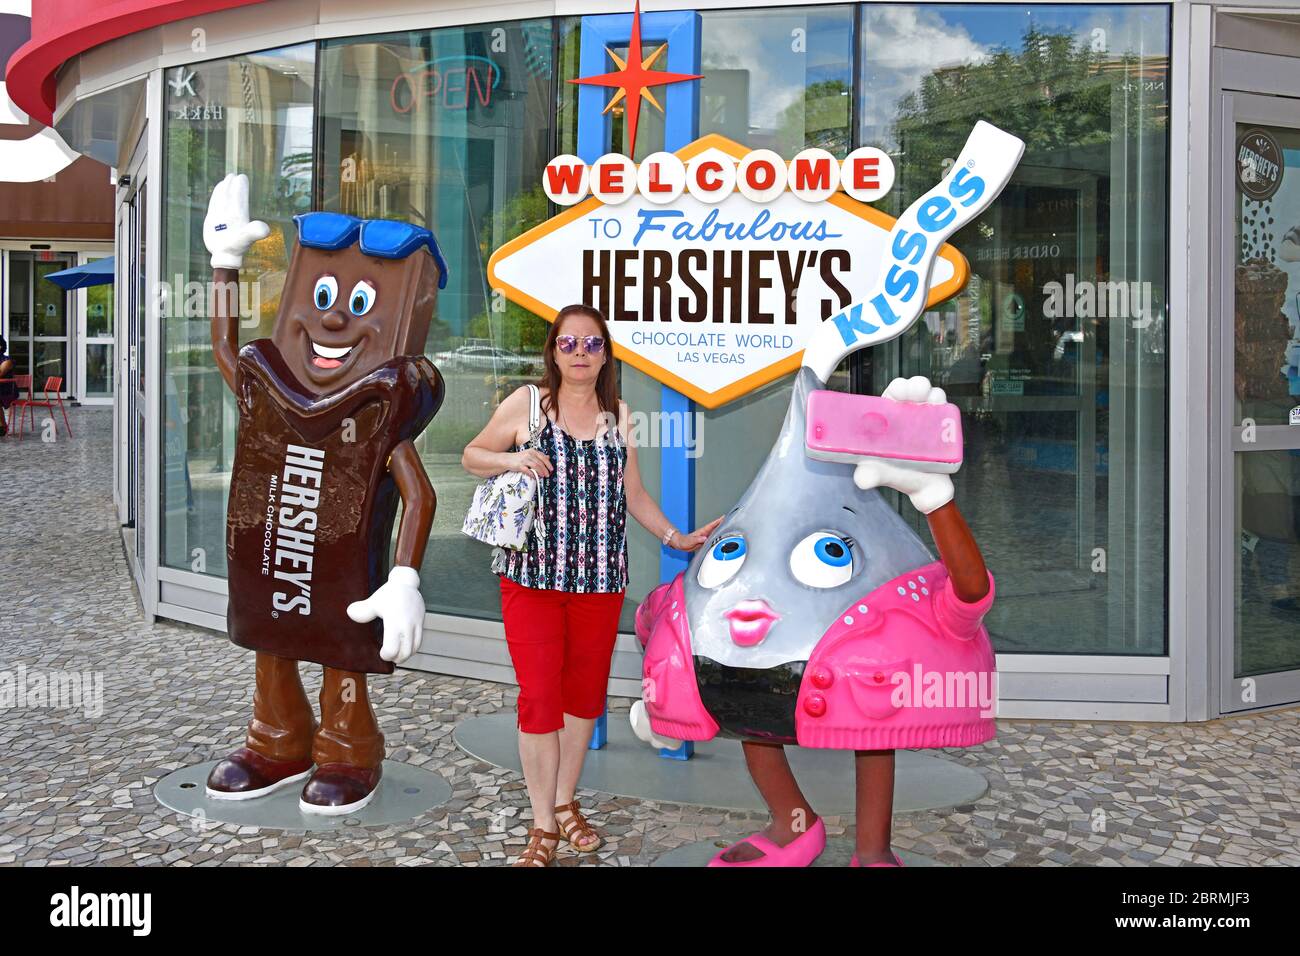 Las Vegas NV, USA 10-1-18 Hershey’s Chocolate World provides an opportunity to take a photo with their characters Kiss and Hershey At the NY-NY Hotel Stock Photo